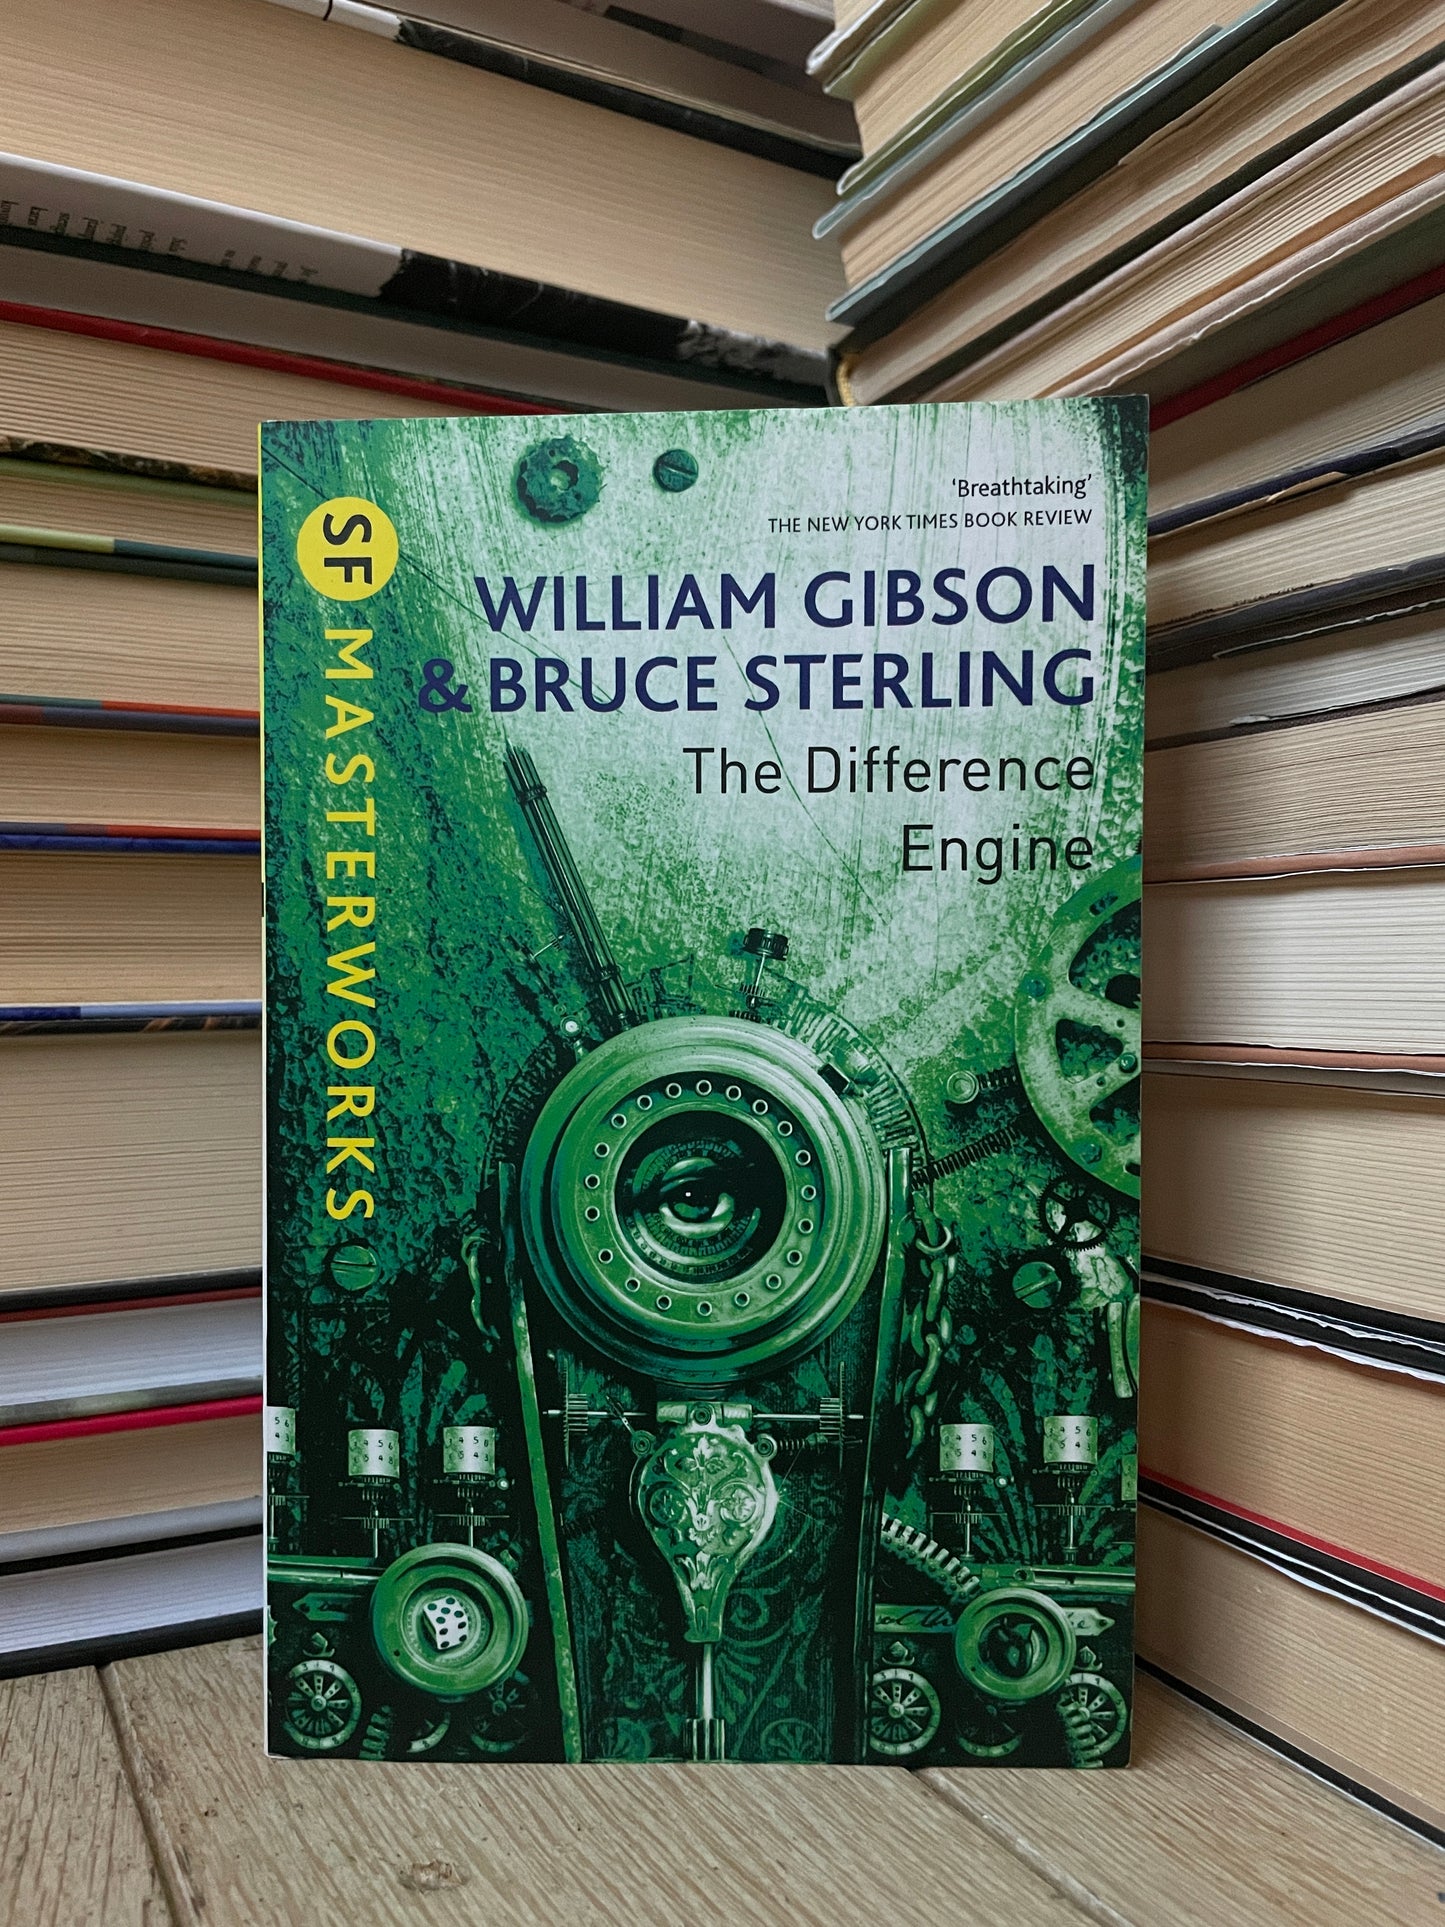 William Gibson, Bruce Sterling - The Difference Engine